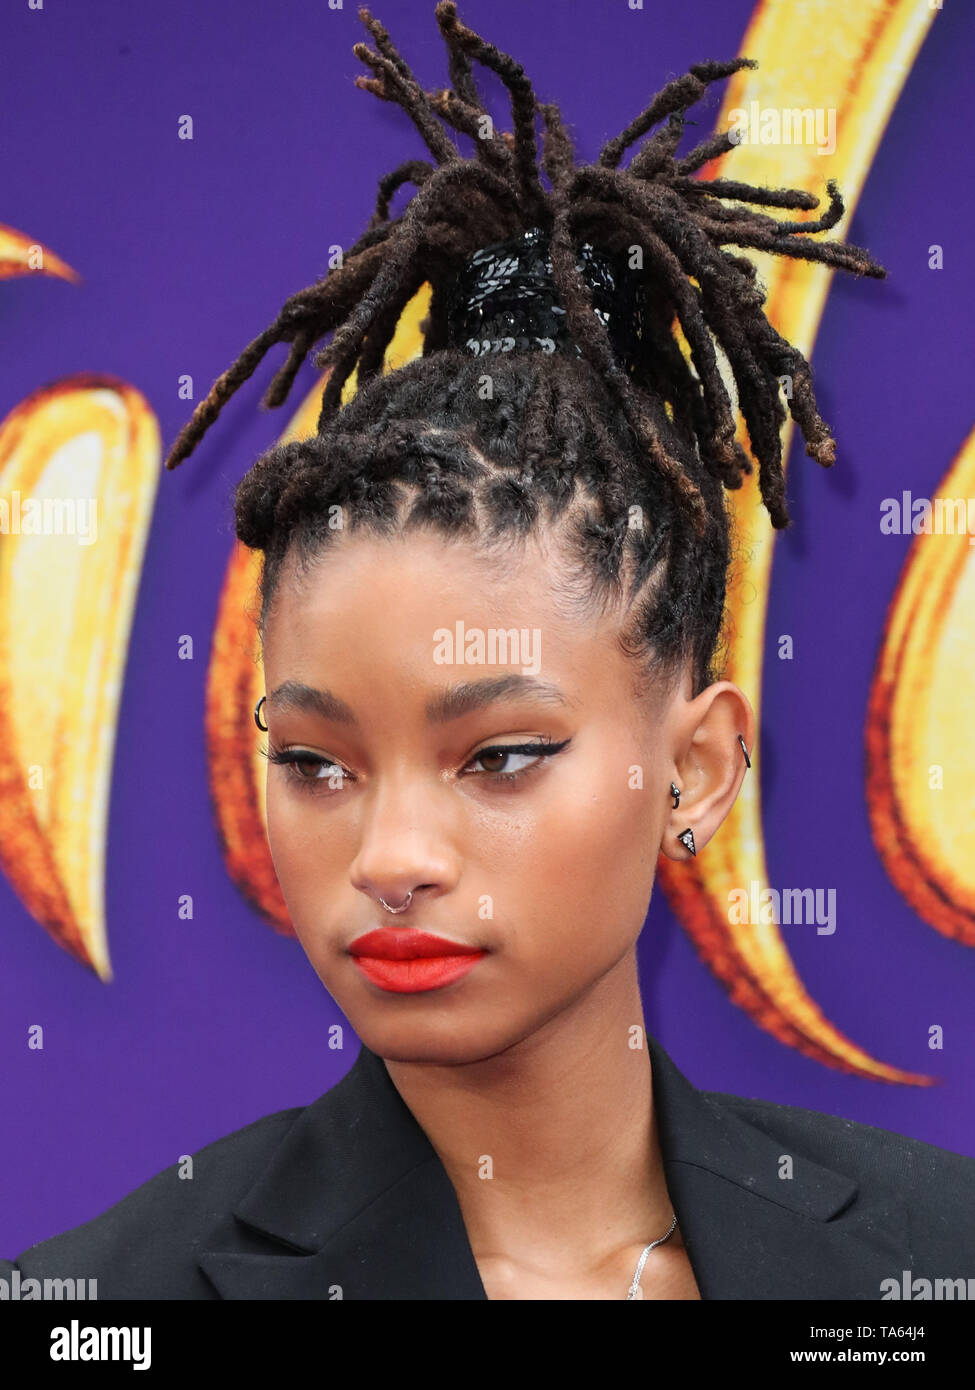 Hollywood, United States. 21st May, 2019. HOLLYWOOD, LOS ANGELES, CALIFORNIA, USA - MAY 21: Singer Willow Smith arrives at the World Premiere Of Disney's 'Aladdin' held at the El Capitan Theatre on May 21, 2019 in Hollywood, Los Angeles, California, United States. (Photo by Xavier Collin/Image Press Agency) Credit: Image Press Agency/Alamy Live News Stock Photo